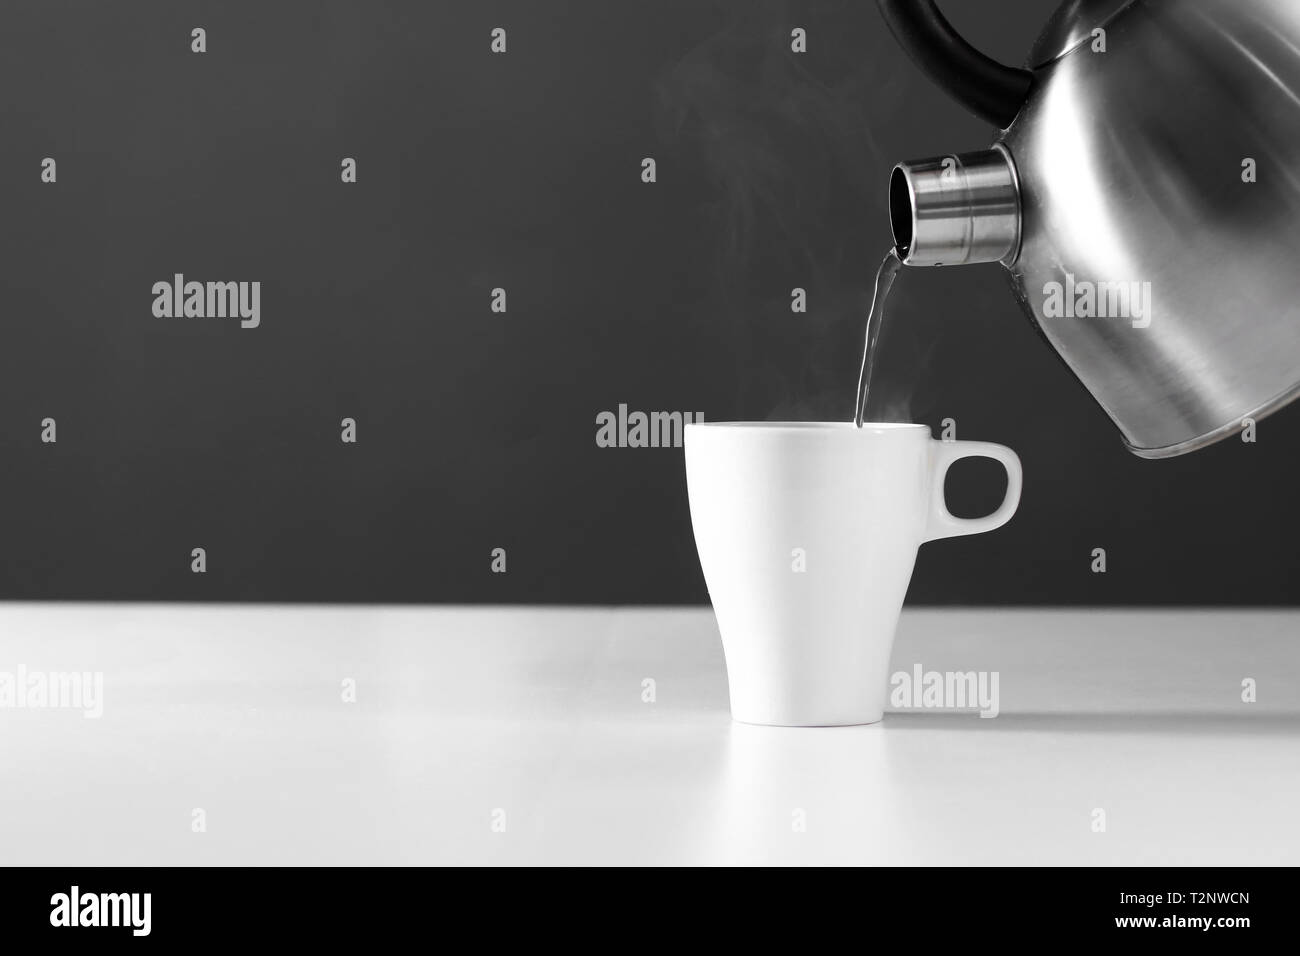 https://c8.alamy.com/comp/T2NWCN/kettle-pouring-boiling-water-into-a-cup-with-smoke-on-wood-table-T2NWCN.jpg